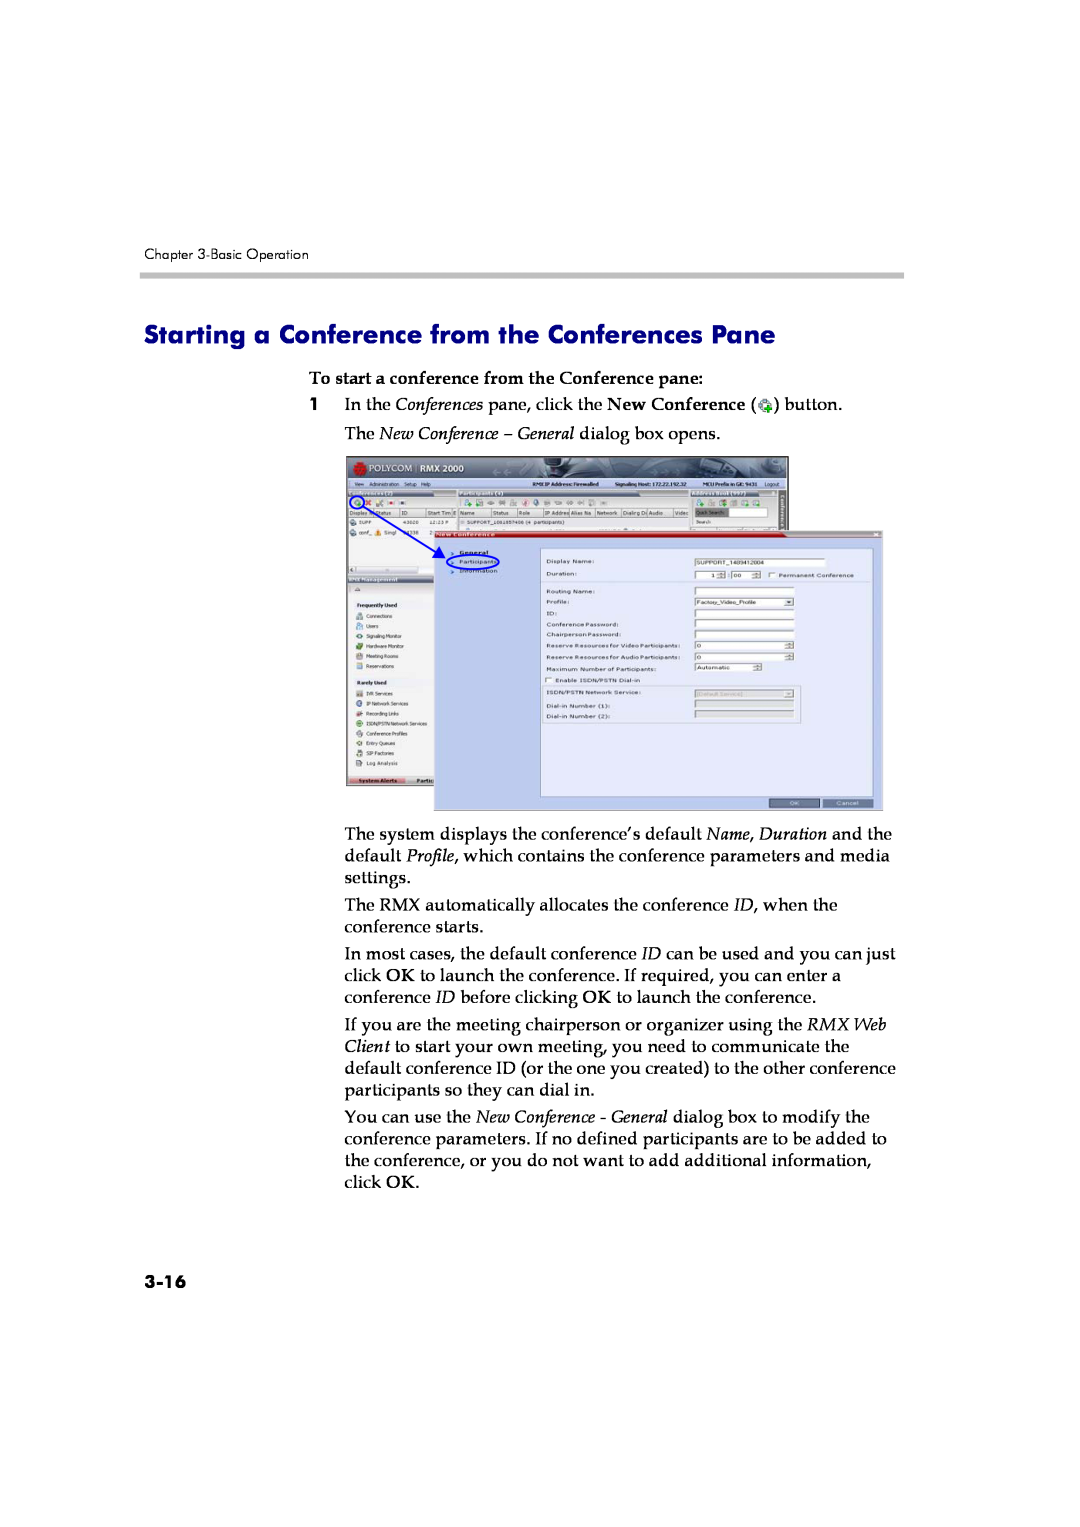 Polycom DOC2560A Starting a Conference from the Conferences Pane, To start a conference from the Conference pane, 3-16 